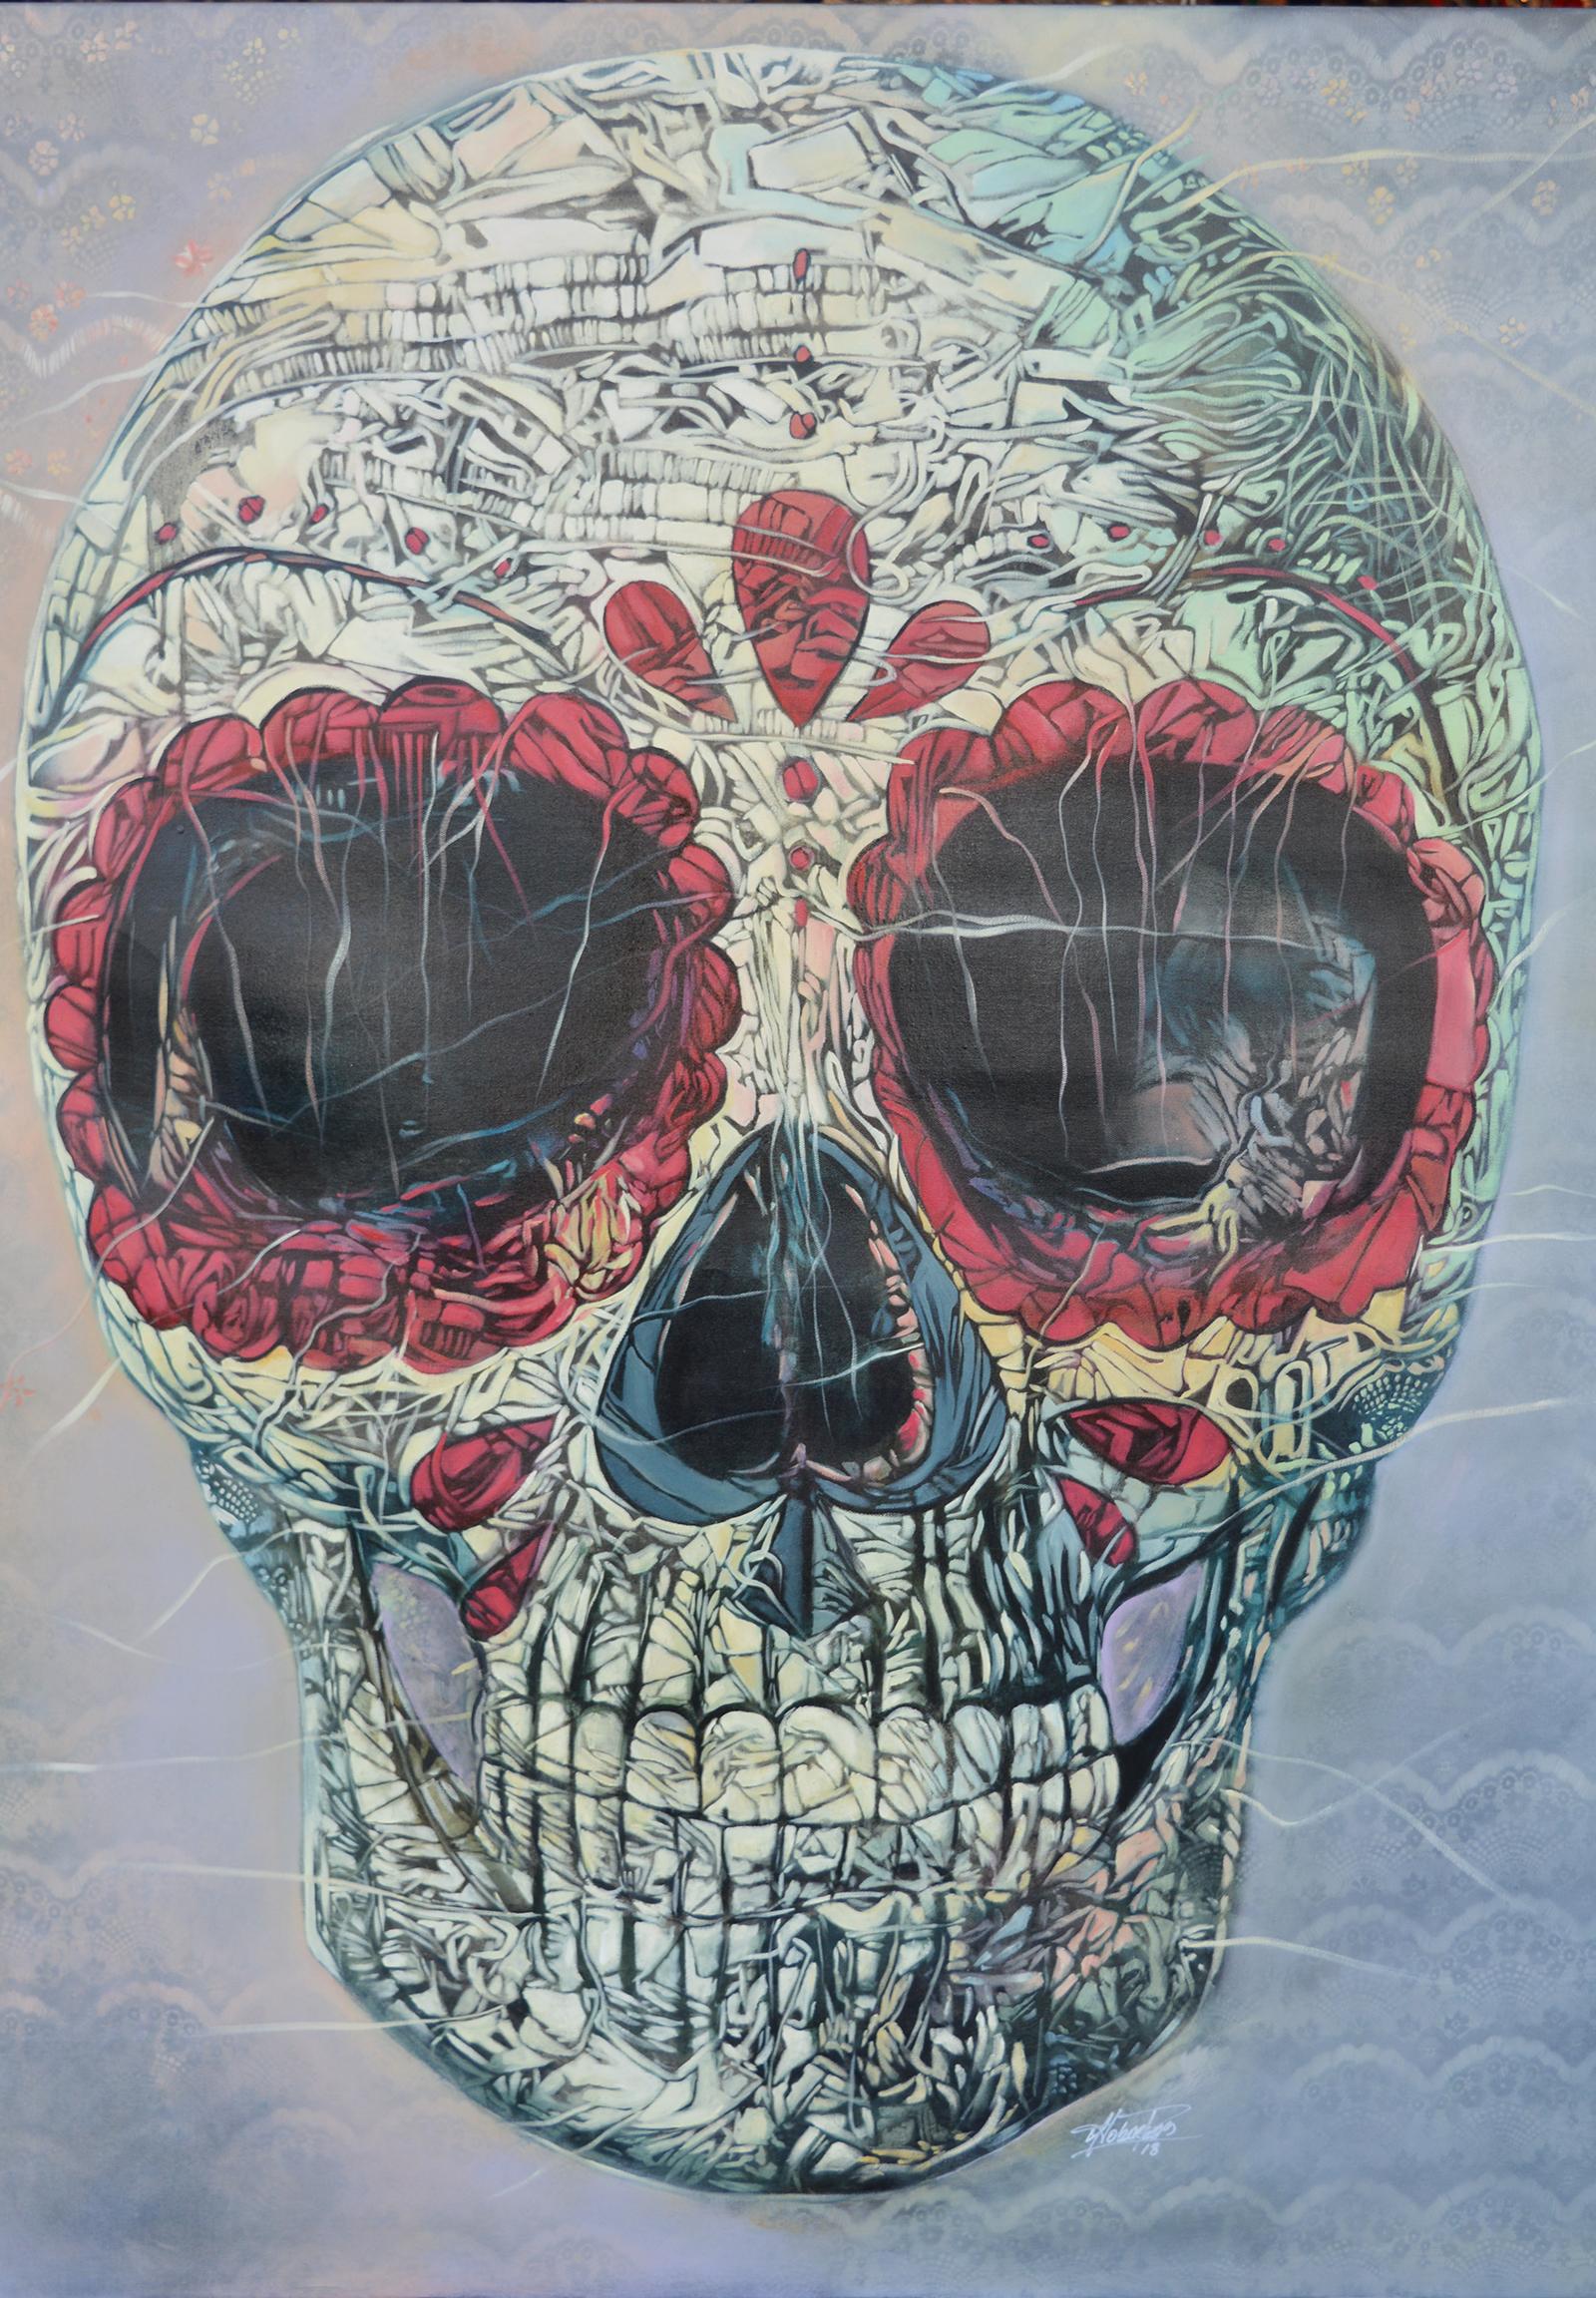 Oil on canvas, candy skull by Cuban artist Noel Dobarganes. Signature on bottom right.